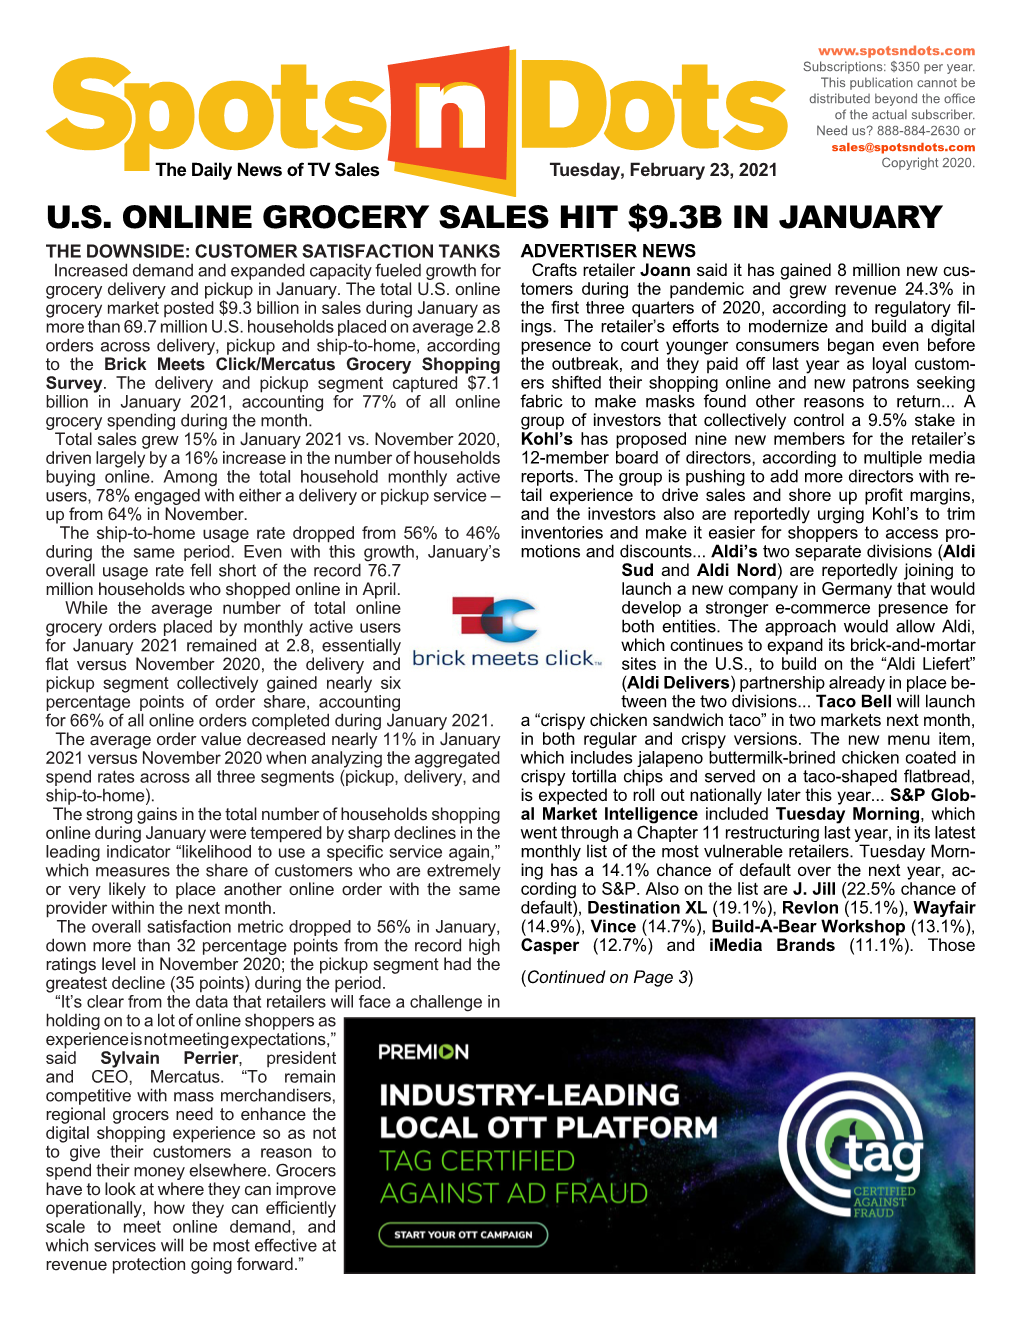 Us Online Grocery Sales Hit $9.3B in January